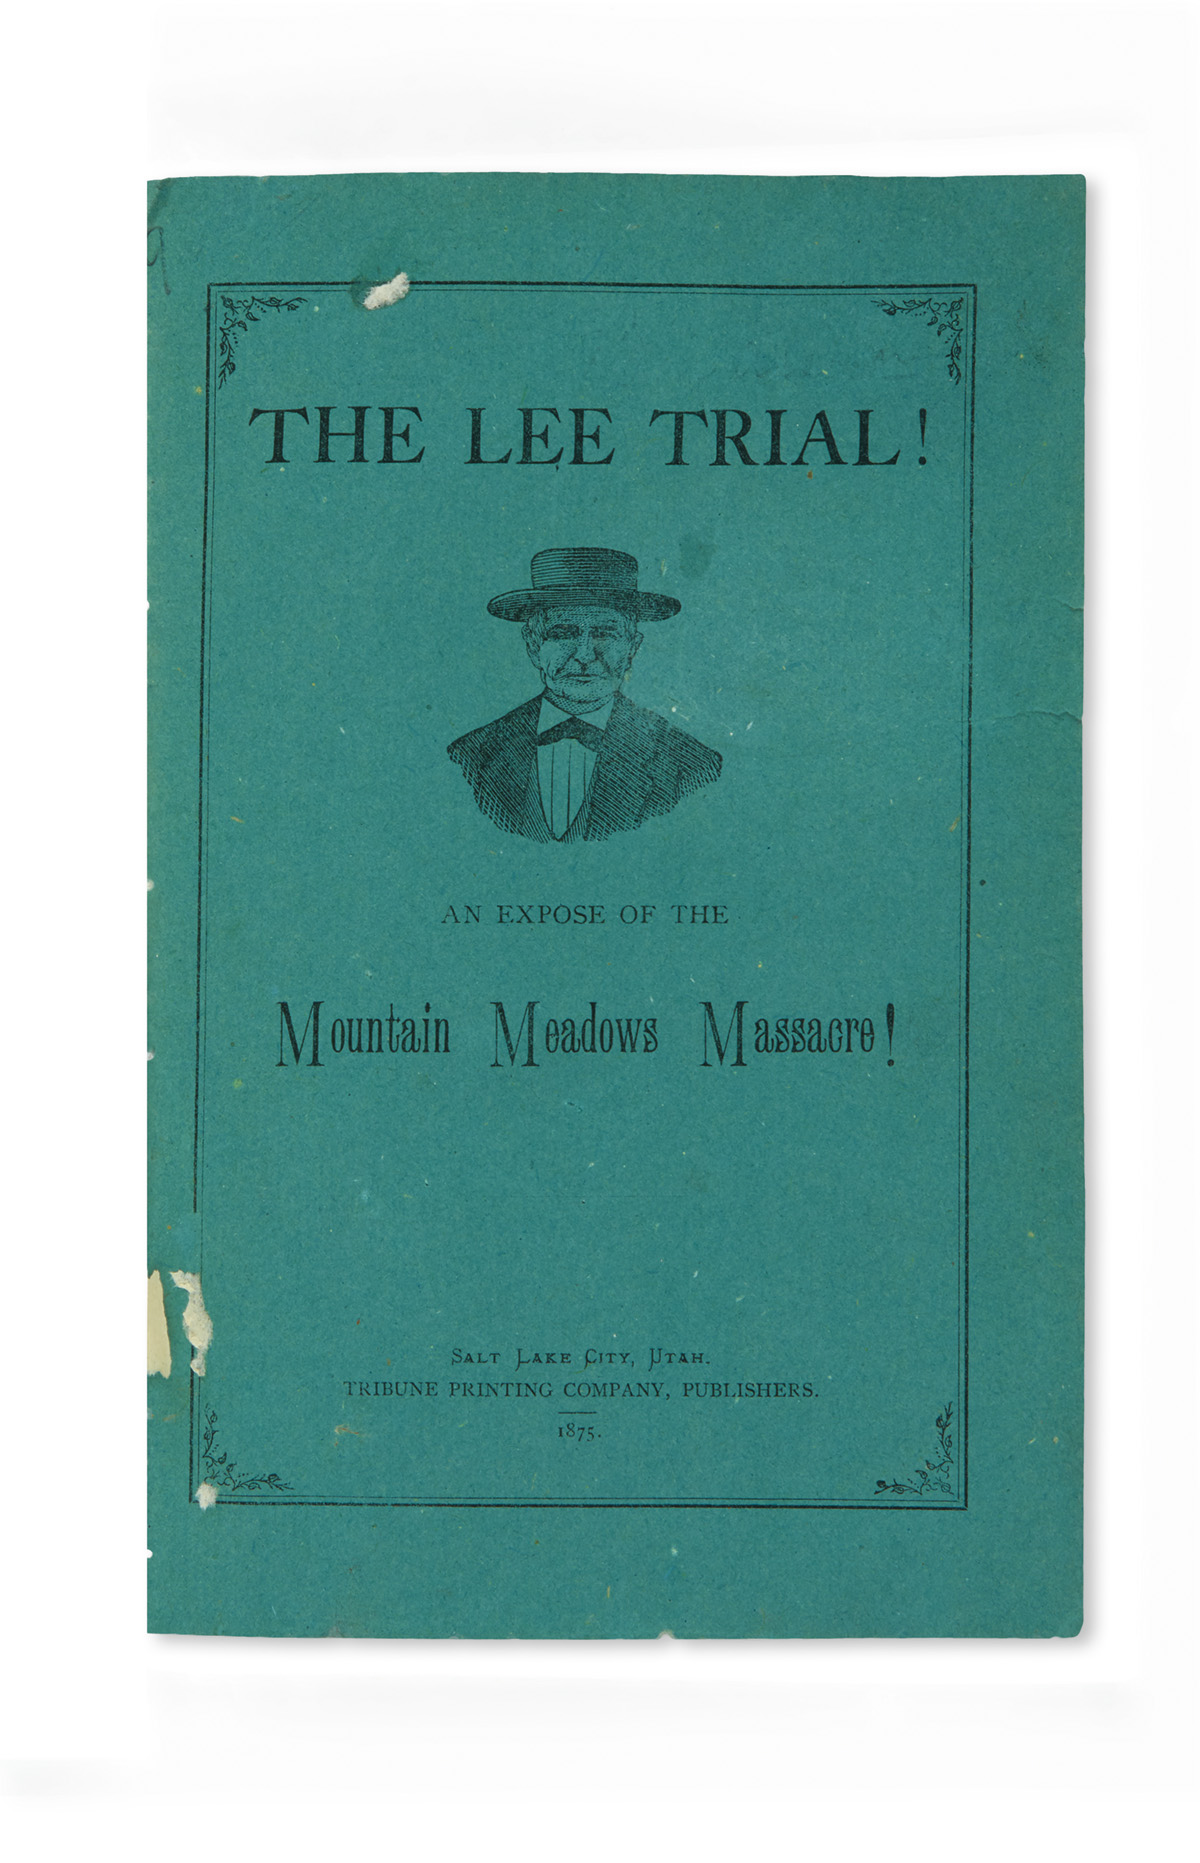 (MORMONS.) The Lee Trial! An Exposé of the Mountain Meadows Massacre.